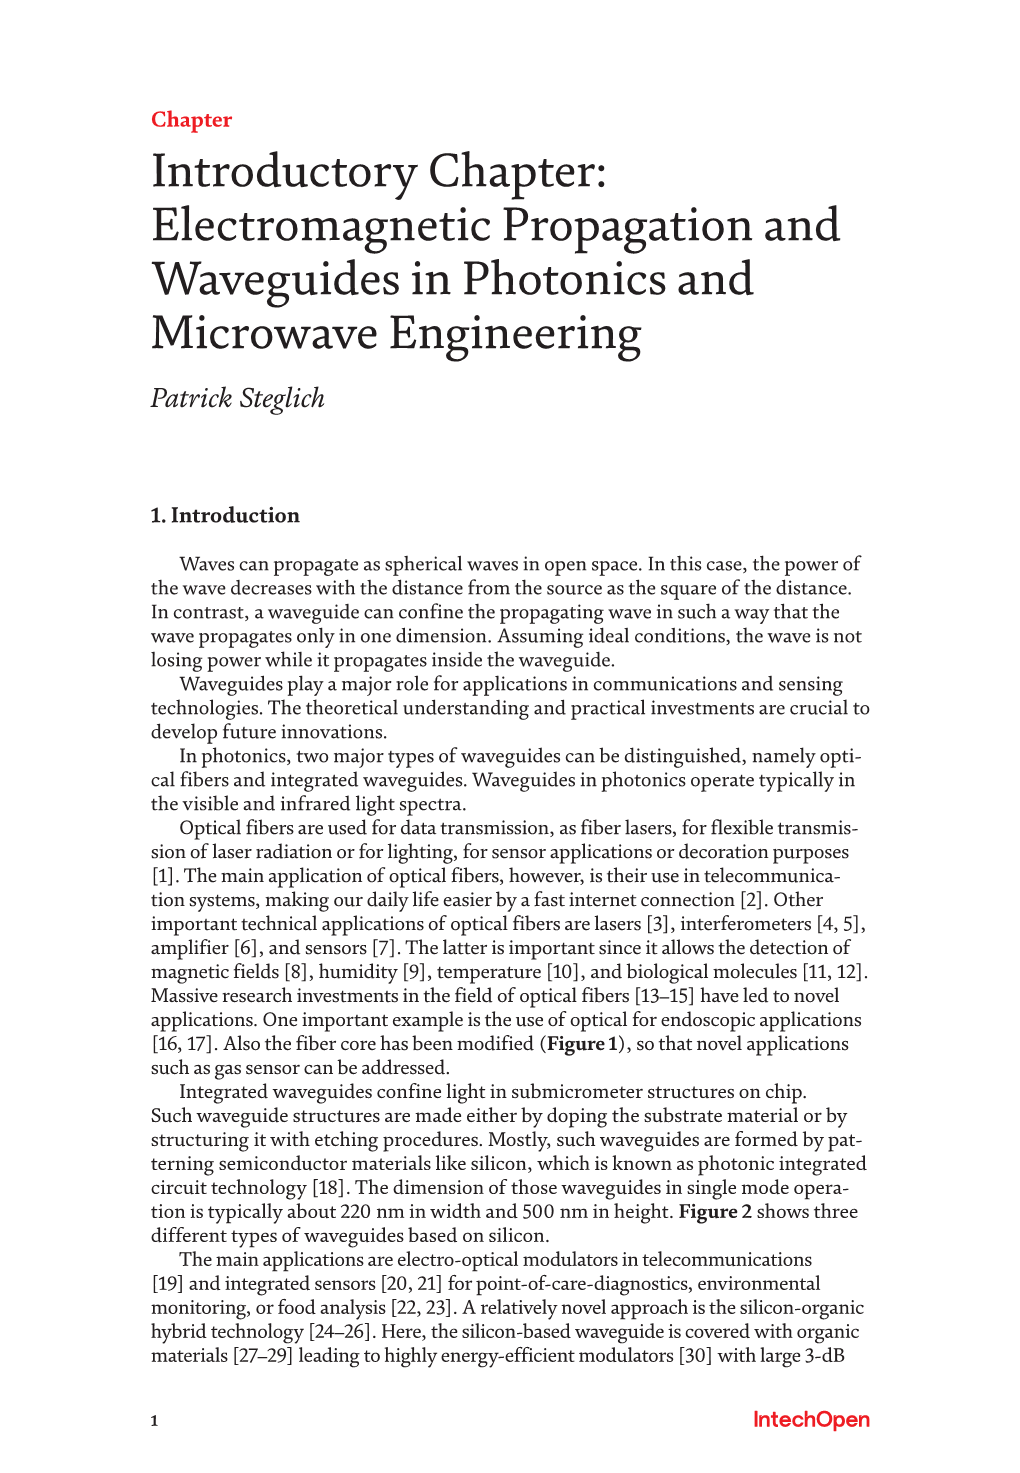 Electromagnetic Propagation and Waveguides in Photonics and Microwave Engineering Patrick Steglich